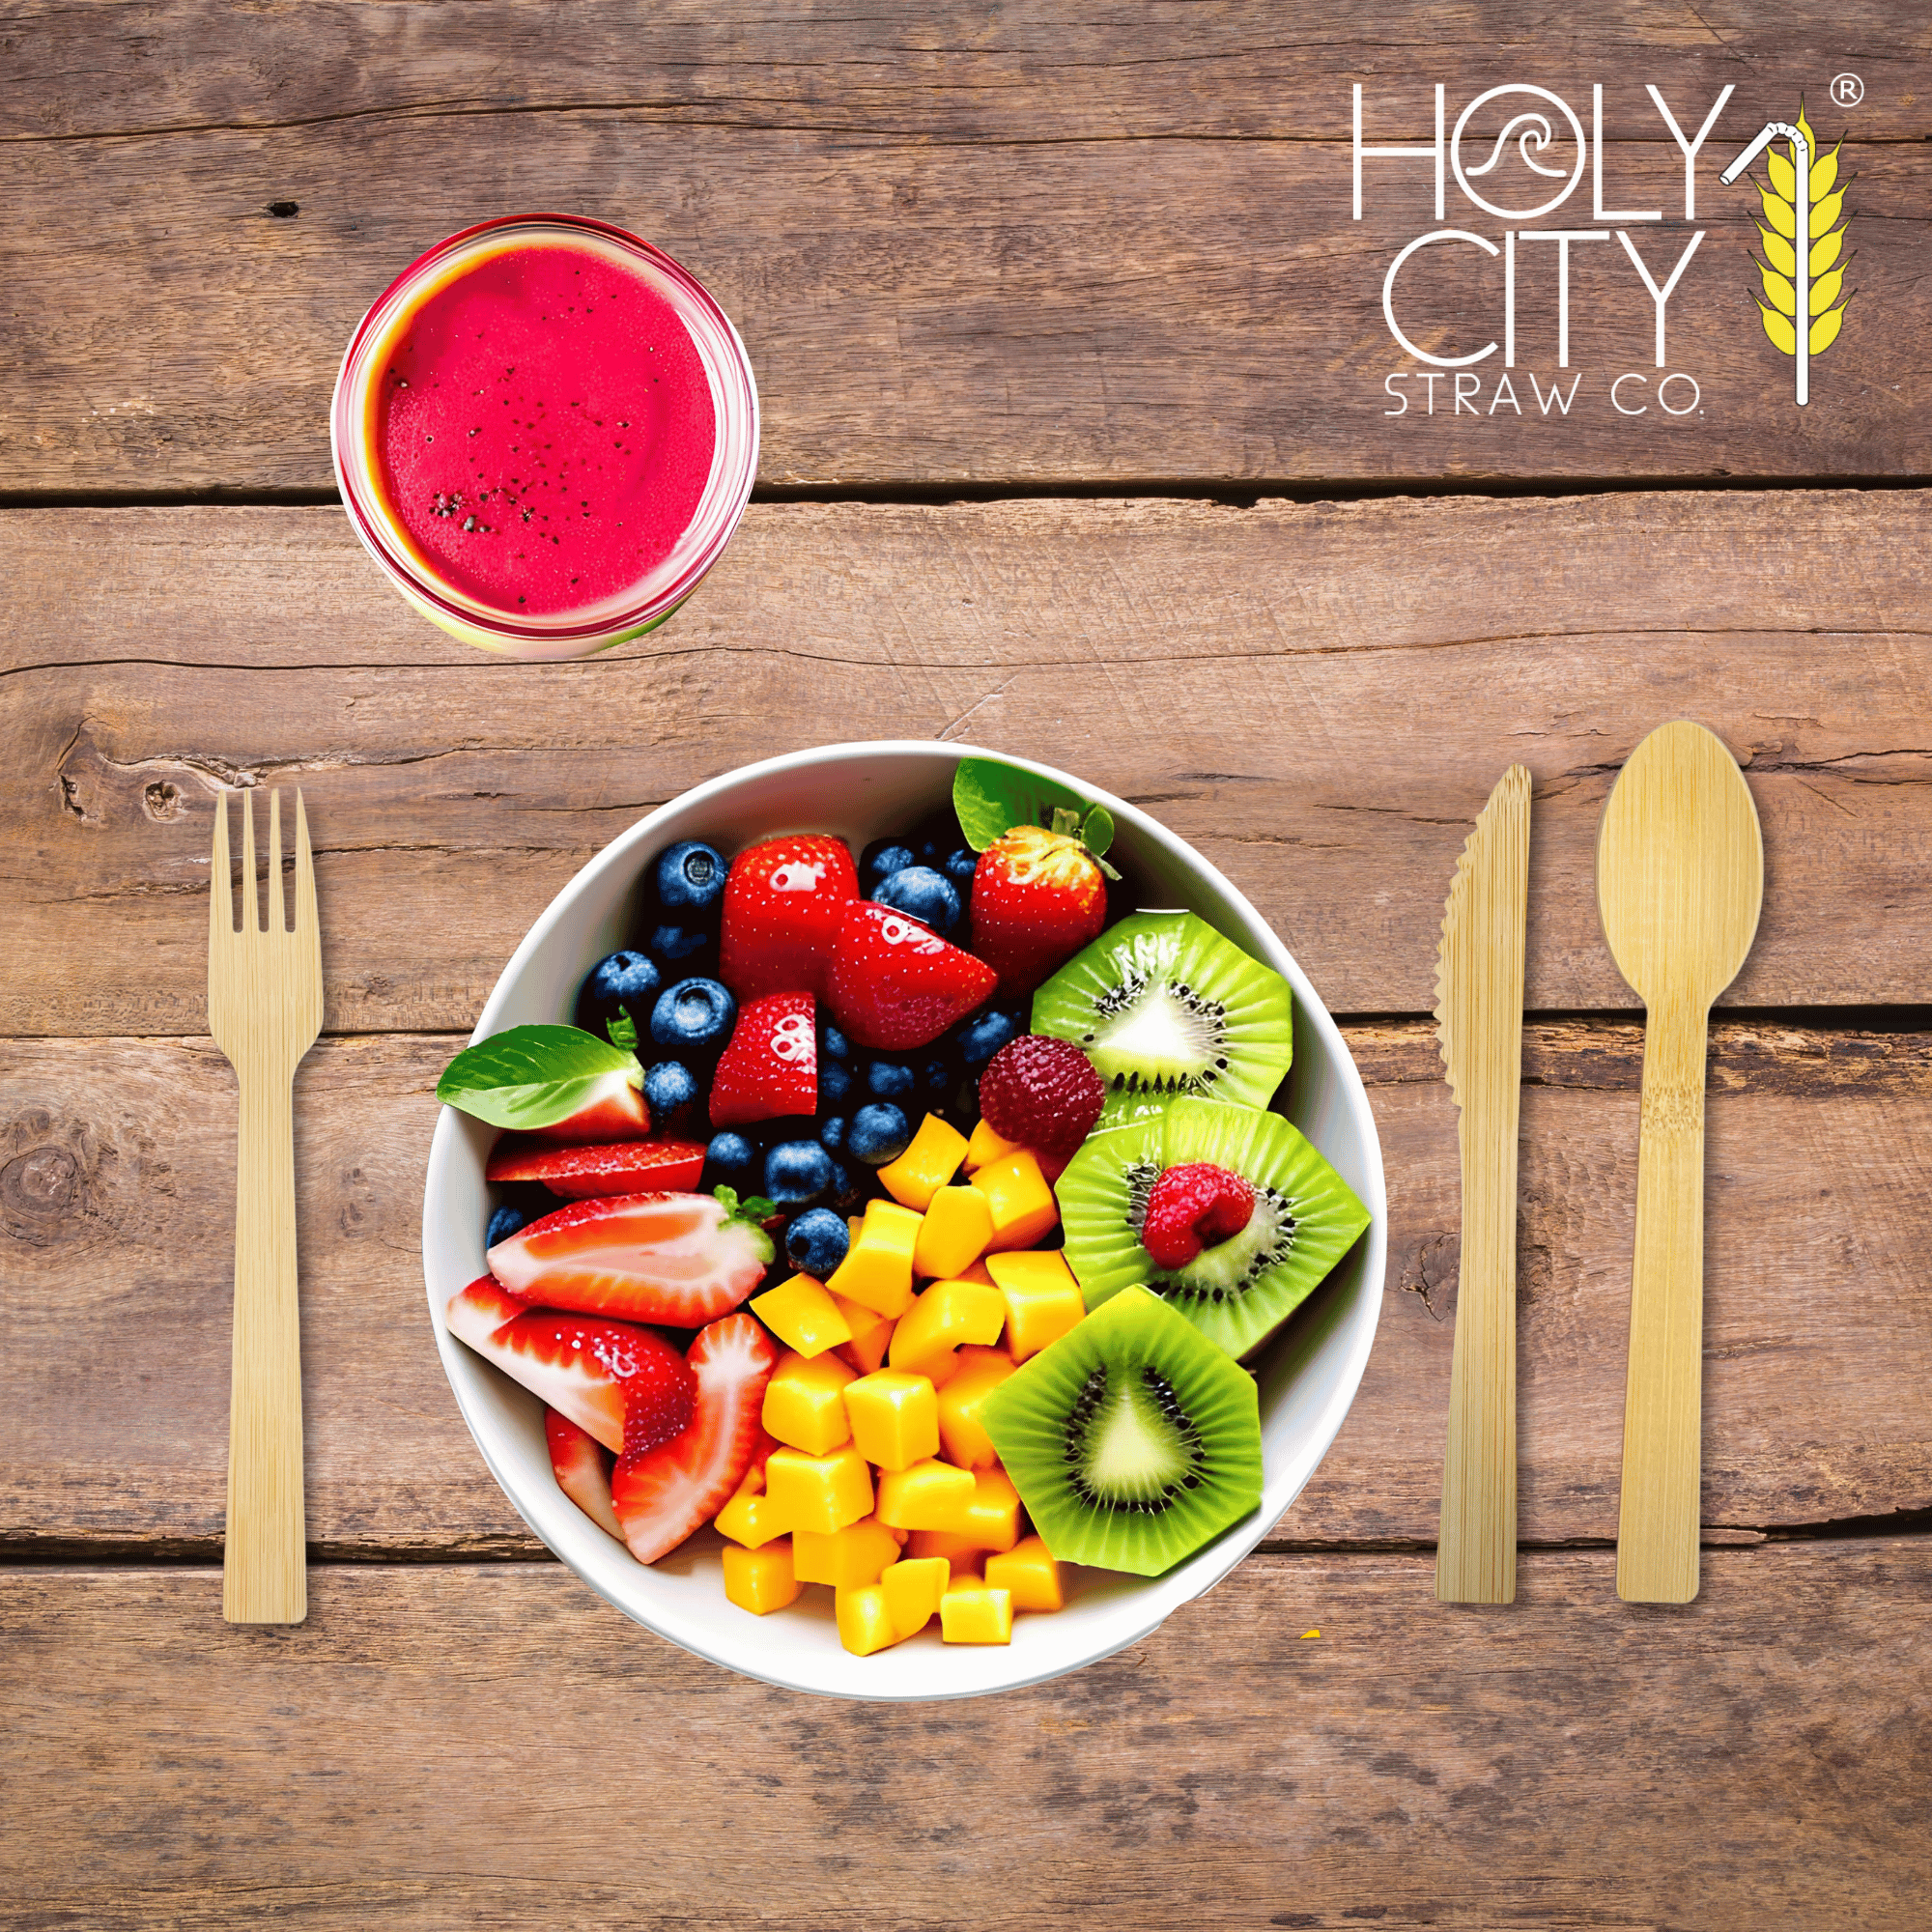 Top view of a wooden table setting featuring Holy City Straw Co. brand bamboo cutlery, with a bamboo fork on the left and a knife on the right, framing a colorful bowl of fresh fruit salad containing strawberries, blueberries, kiwi, and mango cubes. Above the bowl is a glass of red smoothie, and the Holy City Straw Co. logo with a wheat stalk icon is prominently displayed at the top.